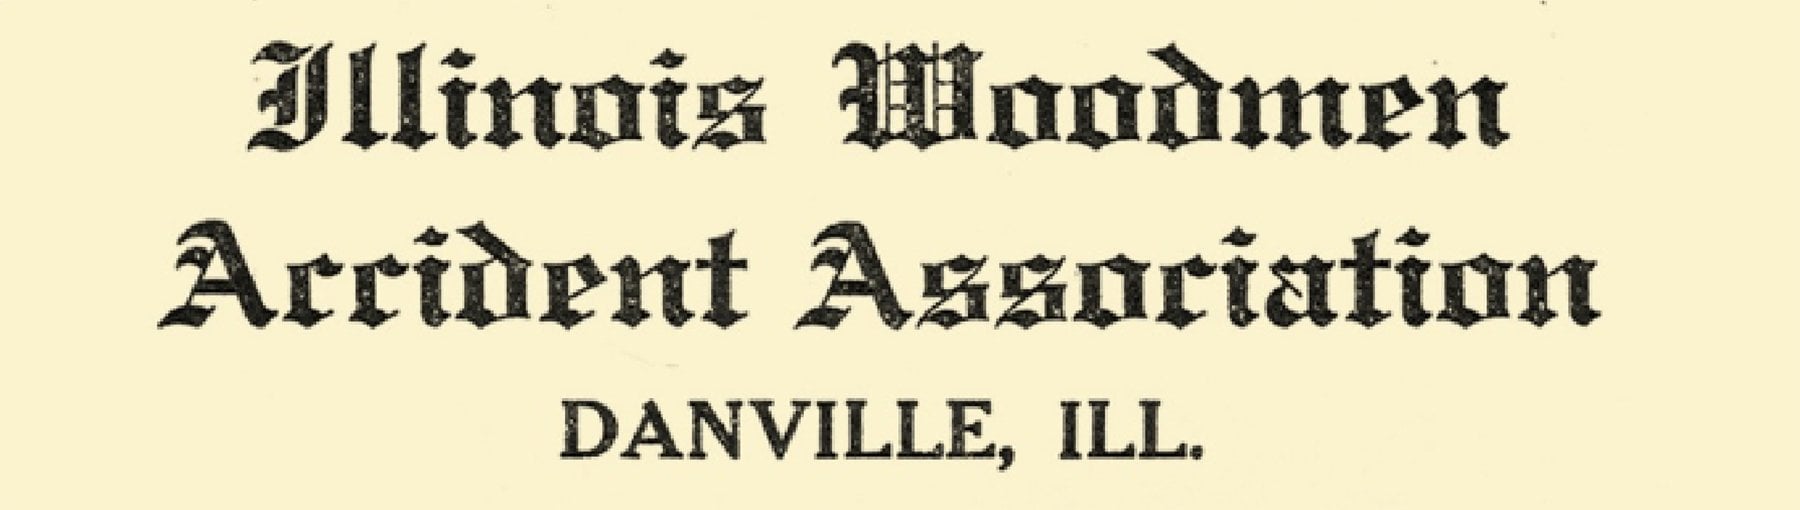 The logo for Illinois Woodmen Accident Association, which would later become Illinois Mutual.